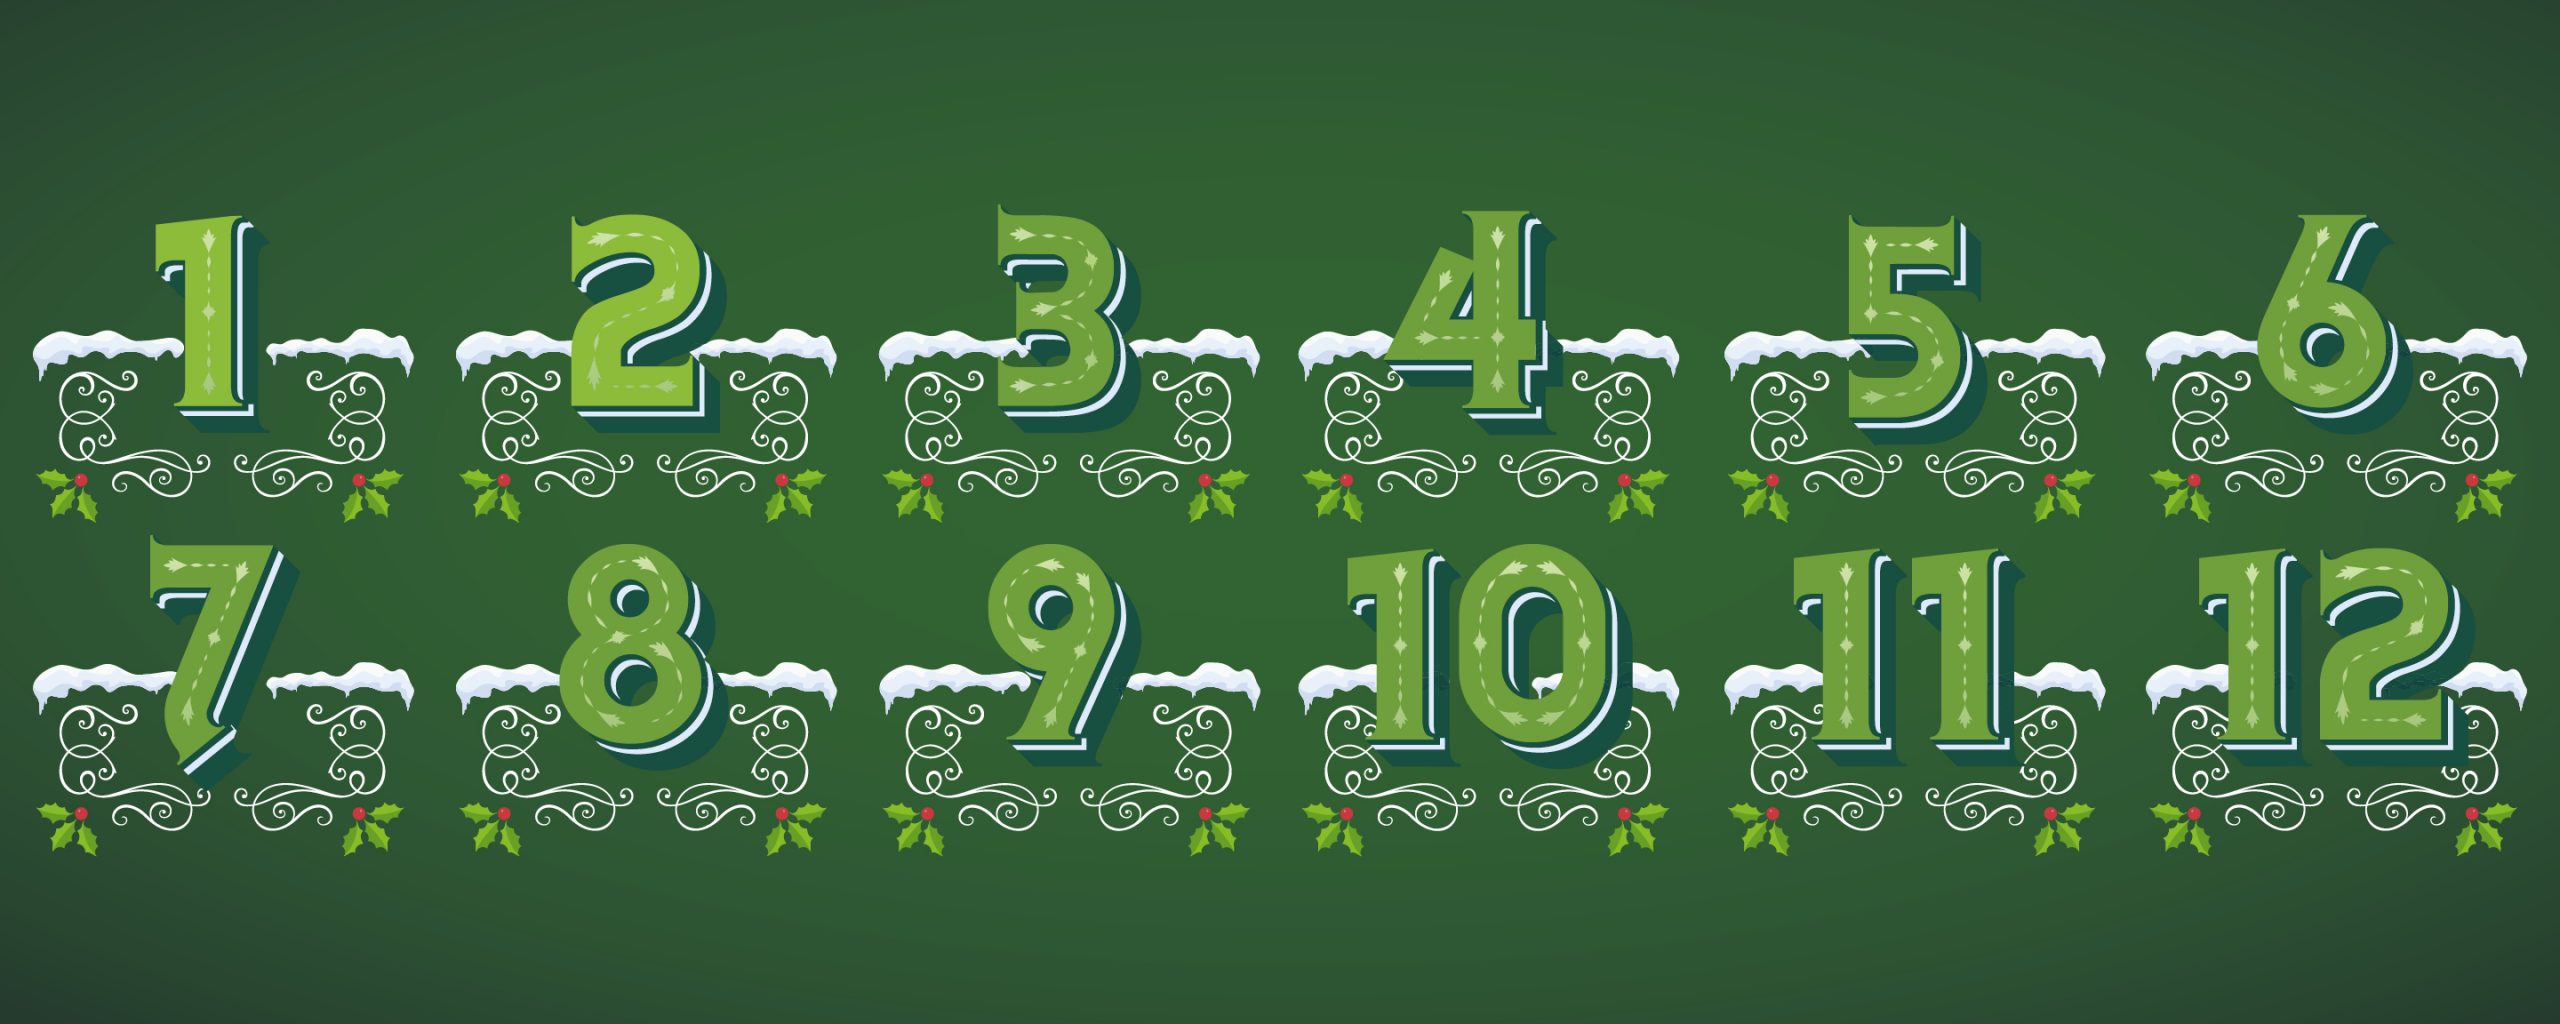 Numbers 1 to 12 in festive font with snow for Christmas campaign by Southern Railway